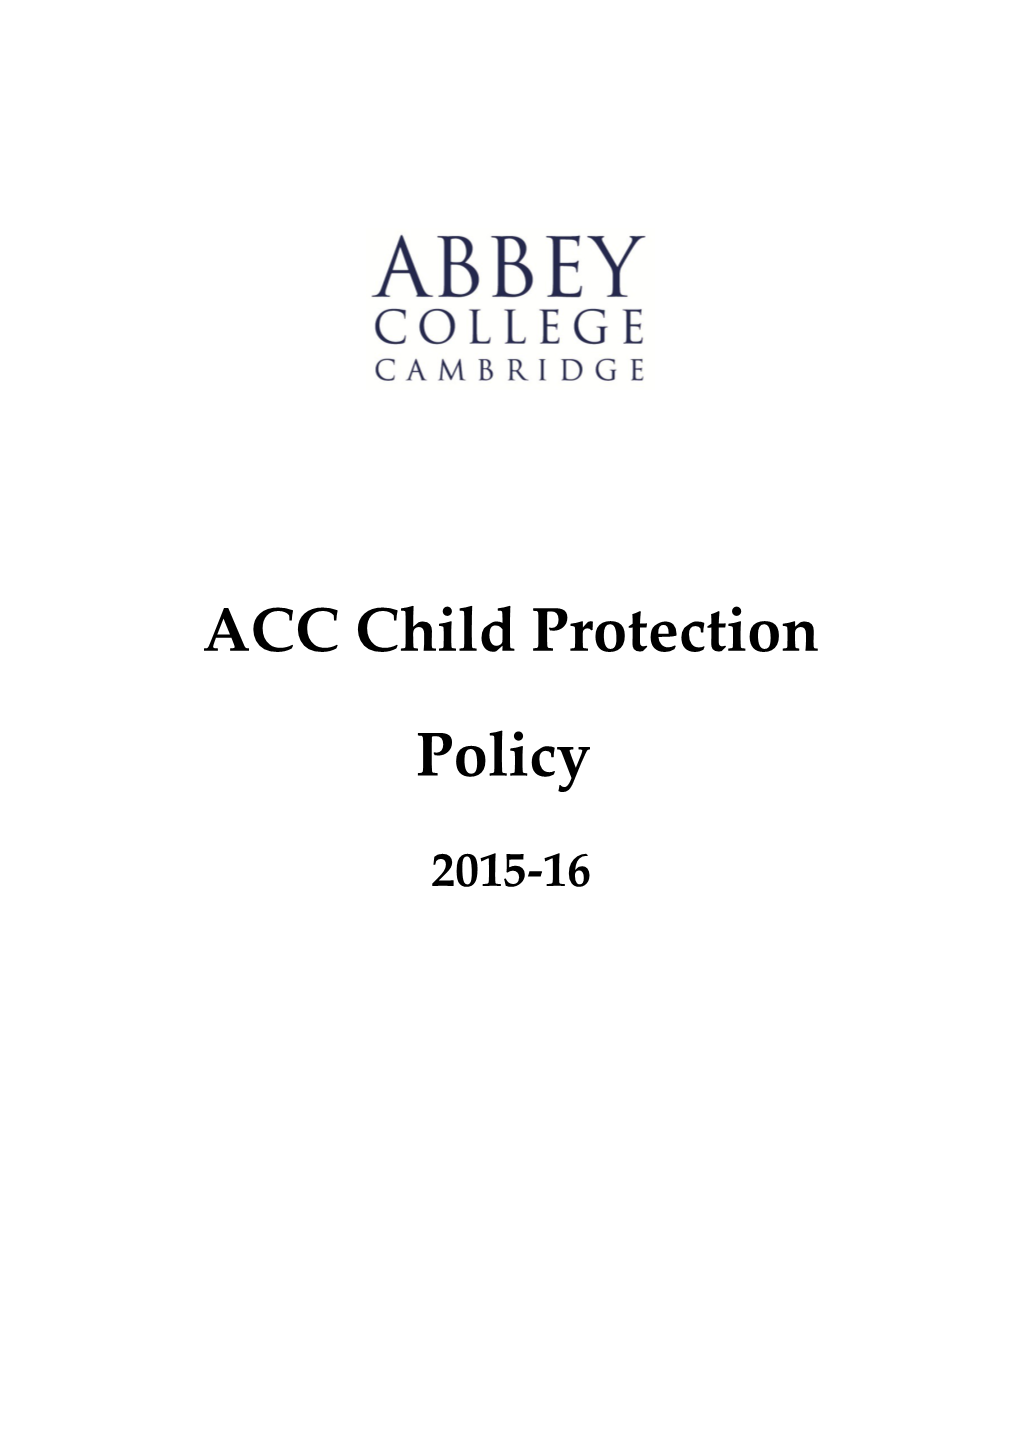 ACC Child Protection Policy 2015-16